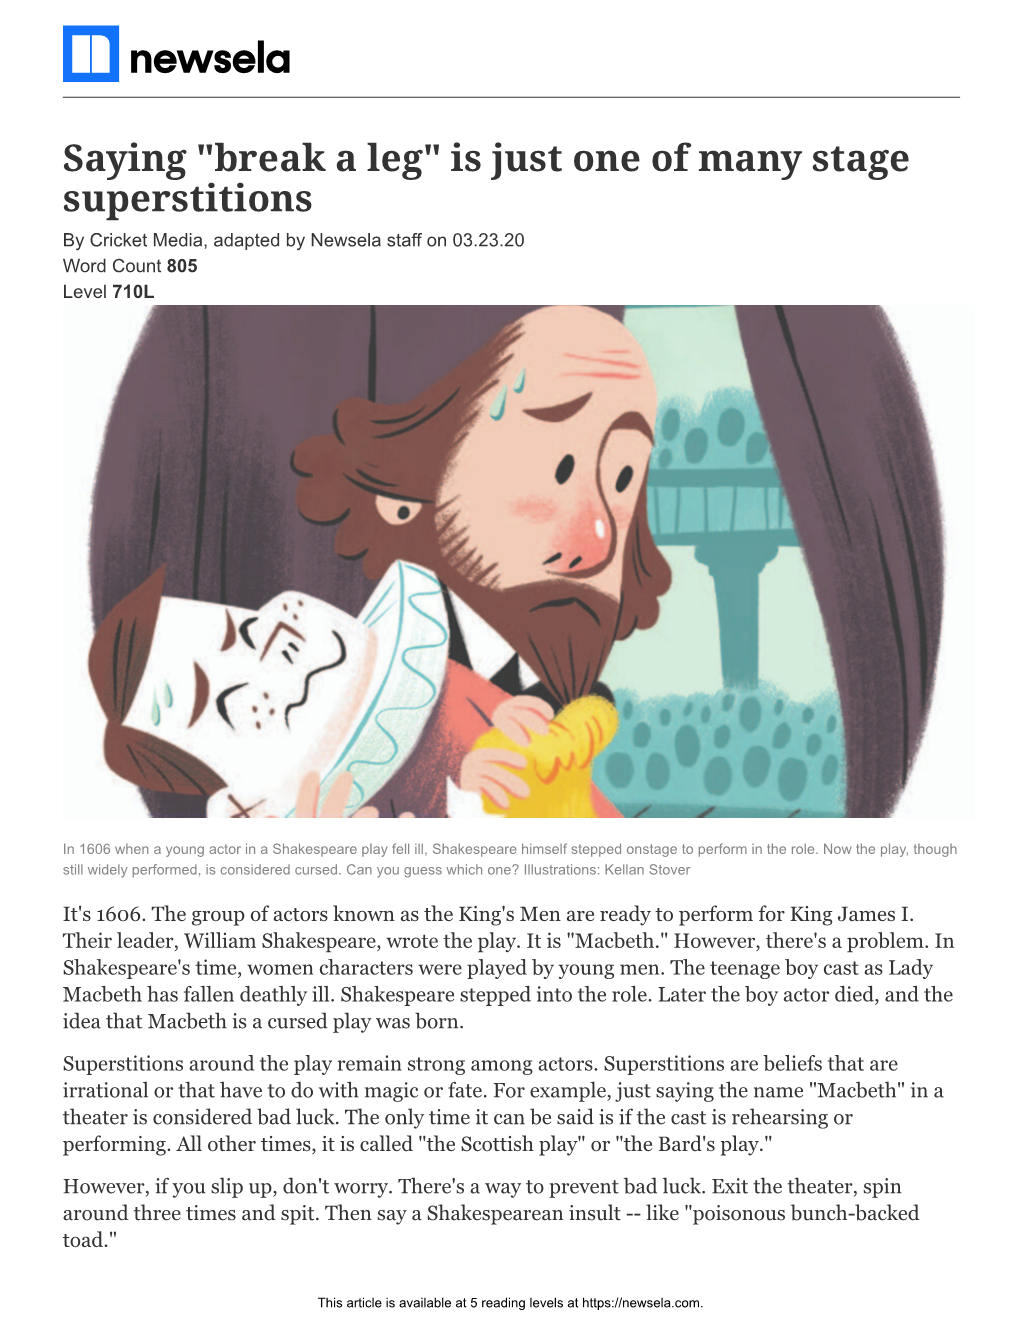 Saying "Break a Leg" Is Just One of Many Stage Superstitions by Cricket Media, Adapted by Newsela Staff on 03.23.20 Word Count 805 Level 710L